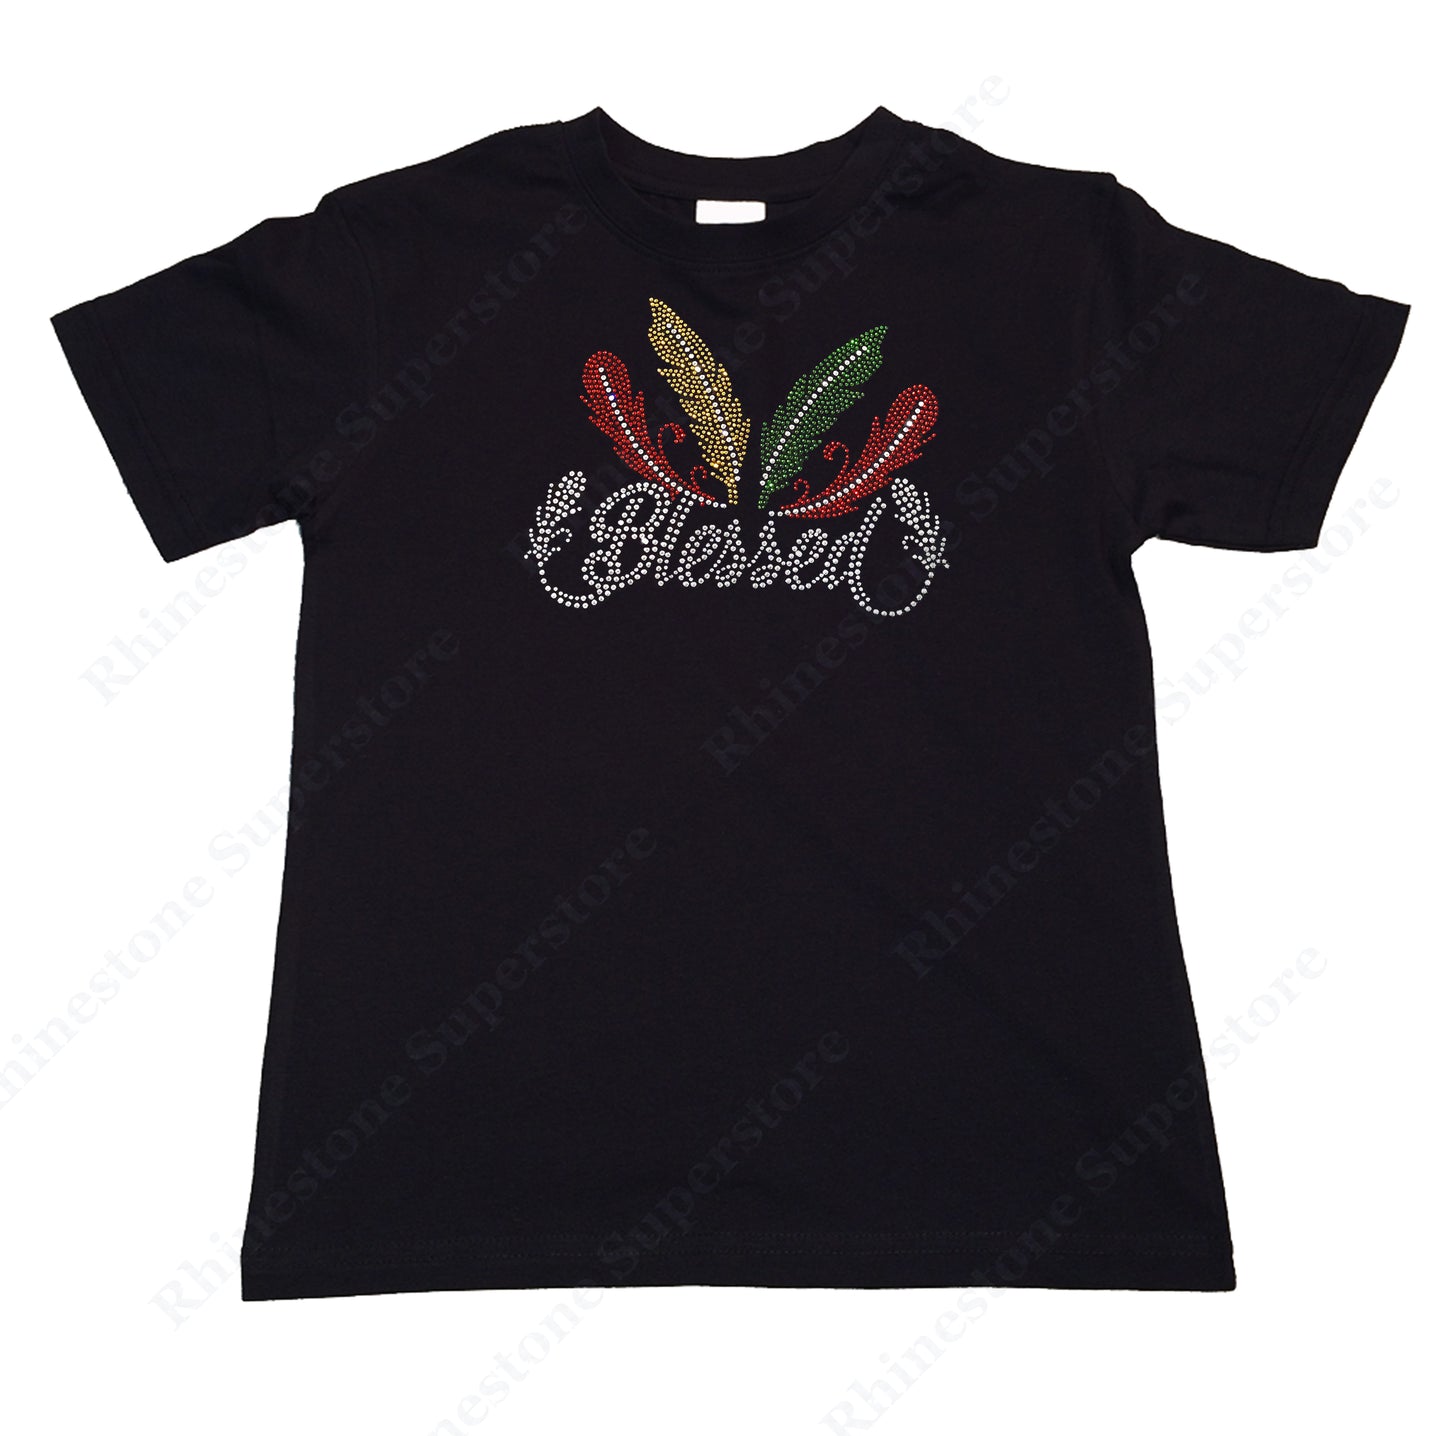 Girl's Rhinestone T-Shirt " Blessed with Colorful Feathers "